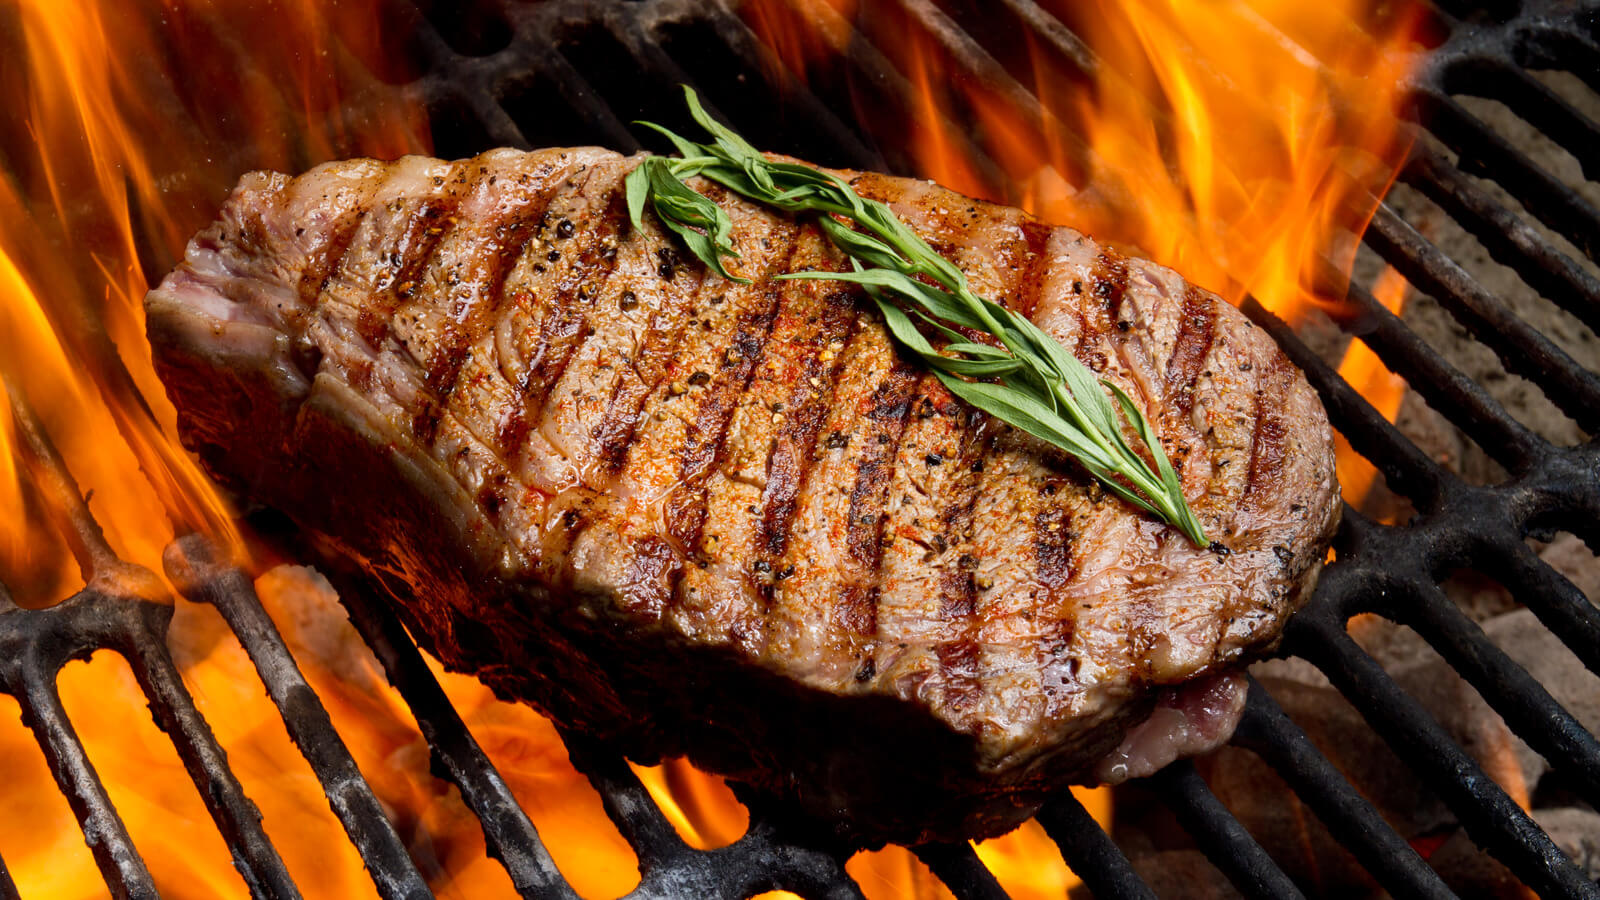 How to grill frozen steak in just 7 simple steps